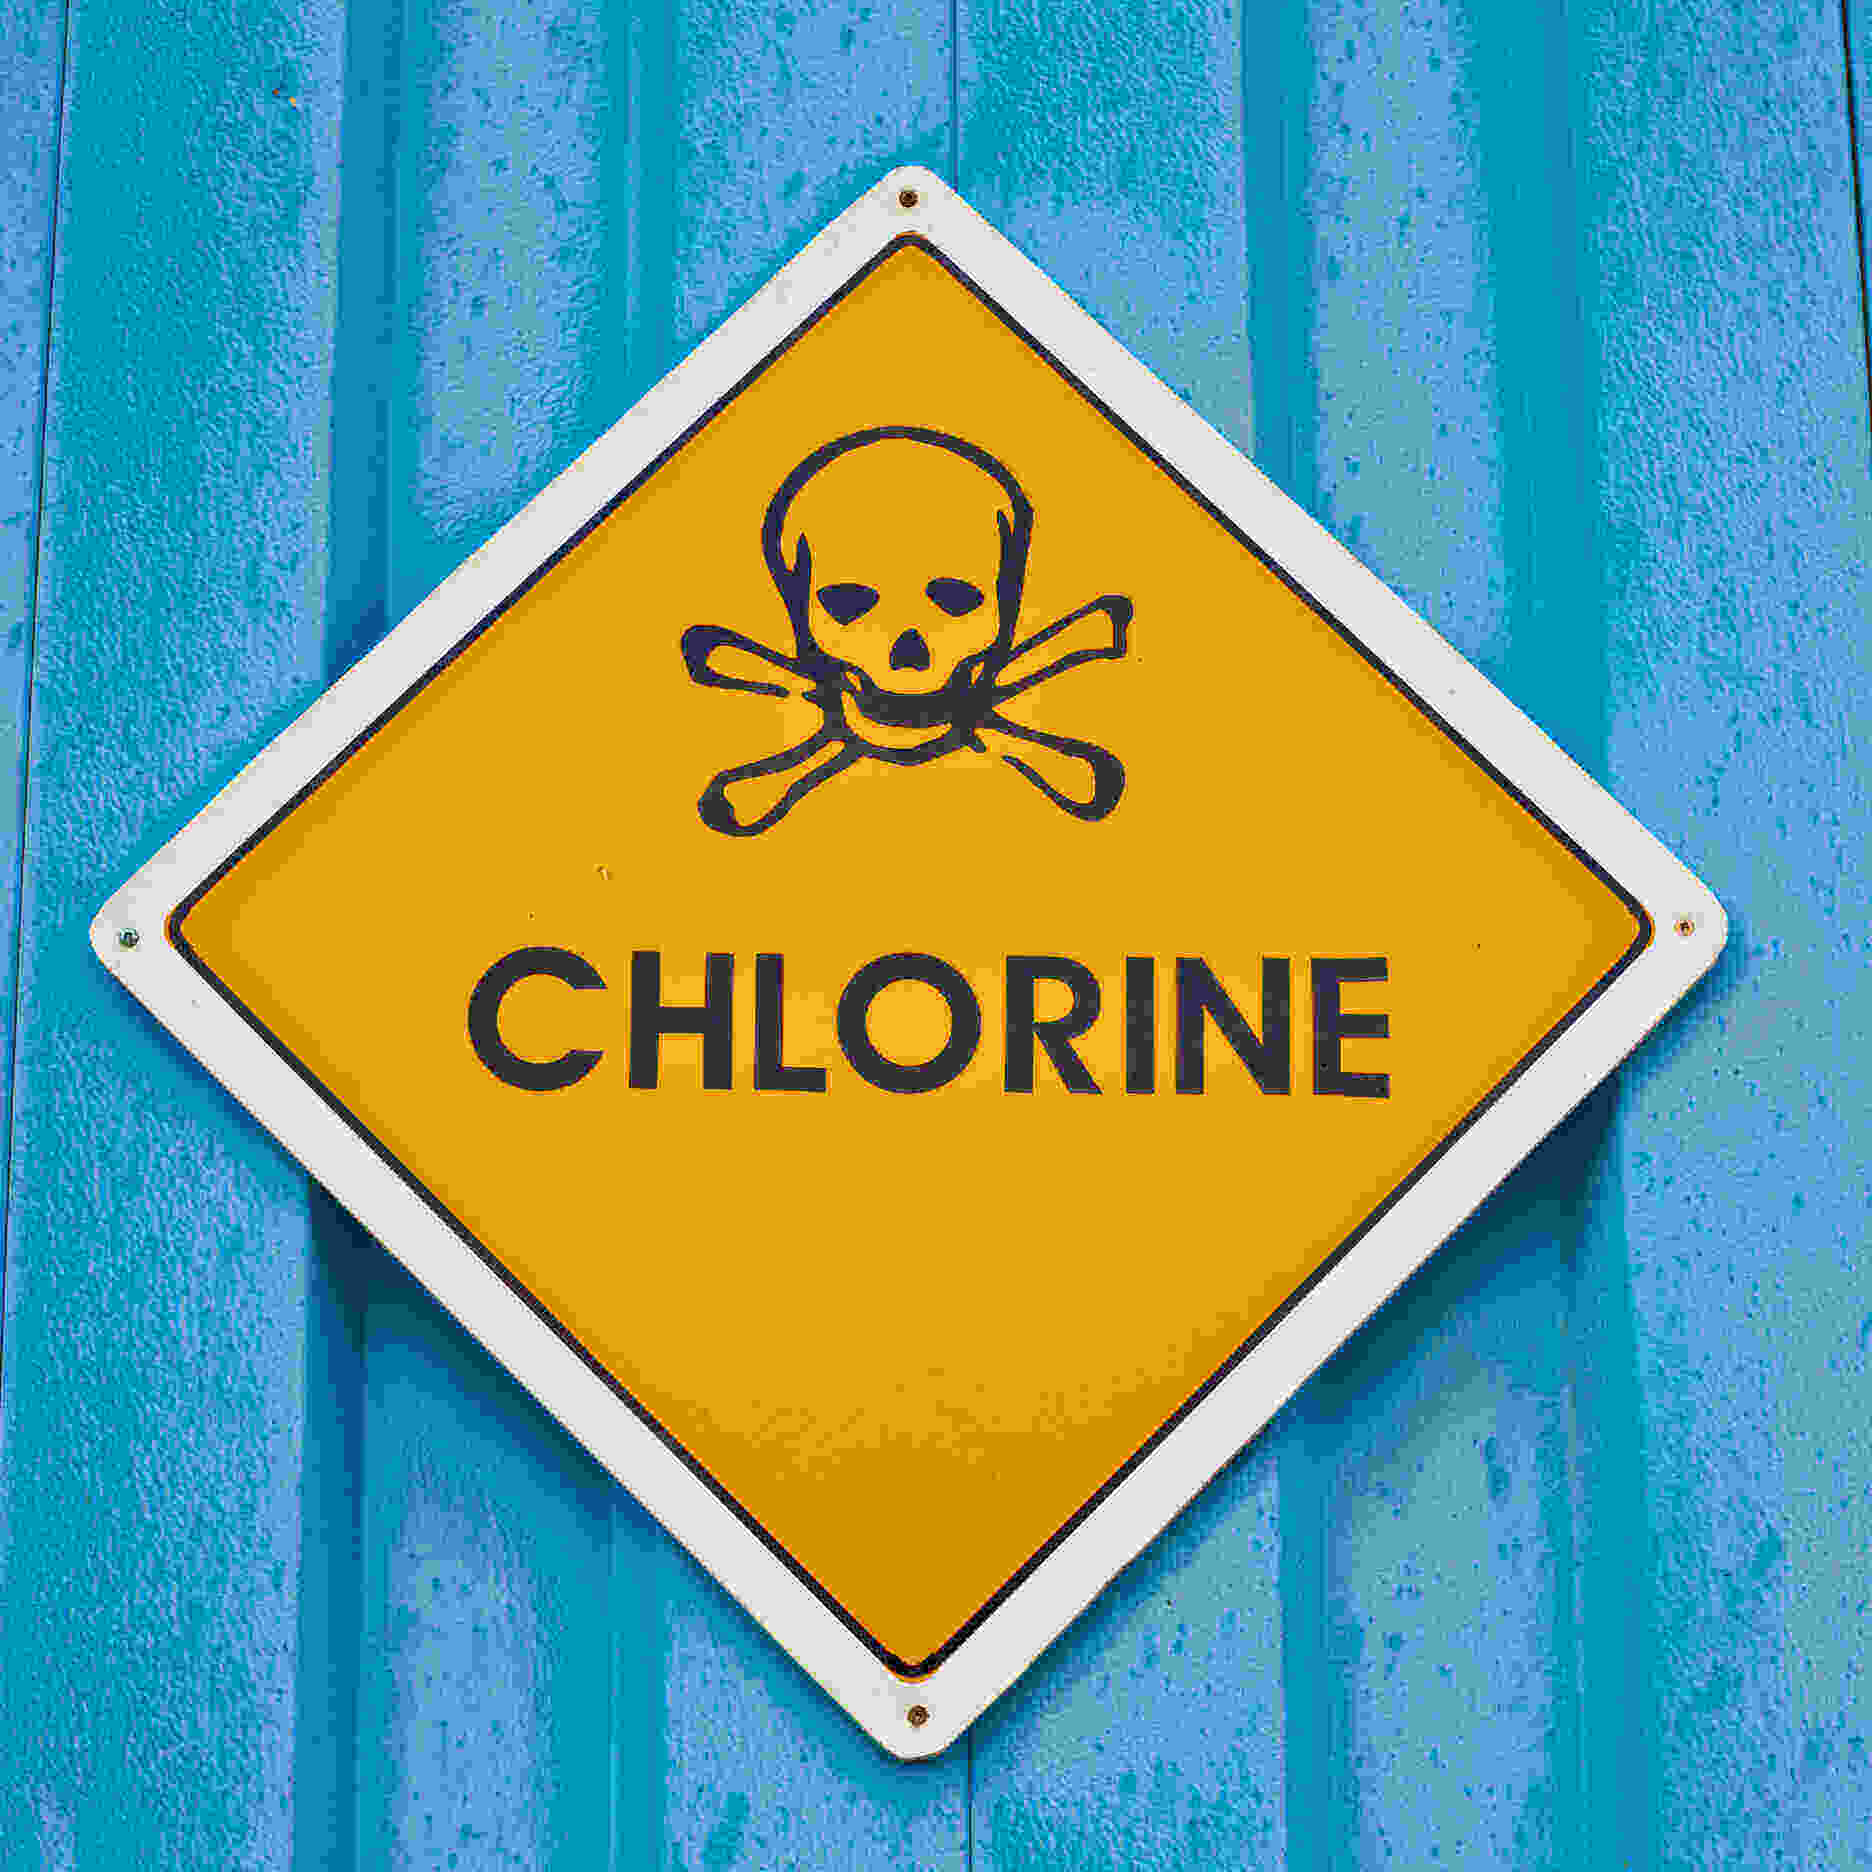 Should I Check The Chlorine Level In My Salt Water Pool?